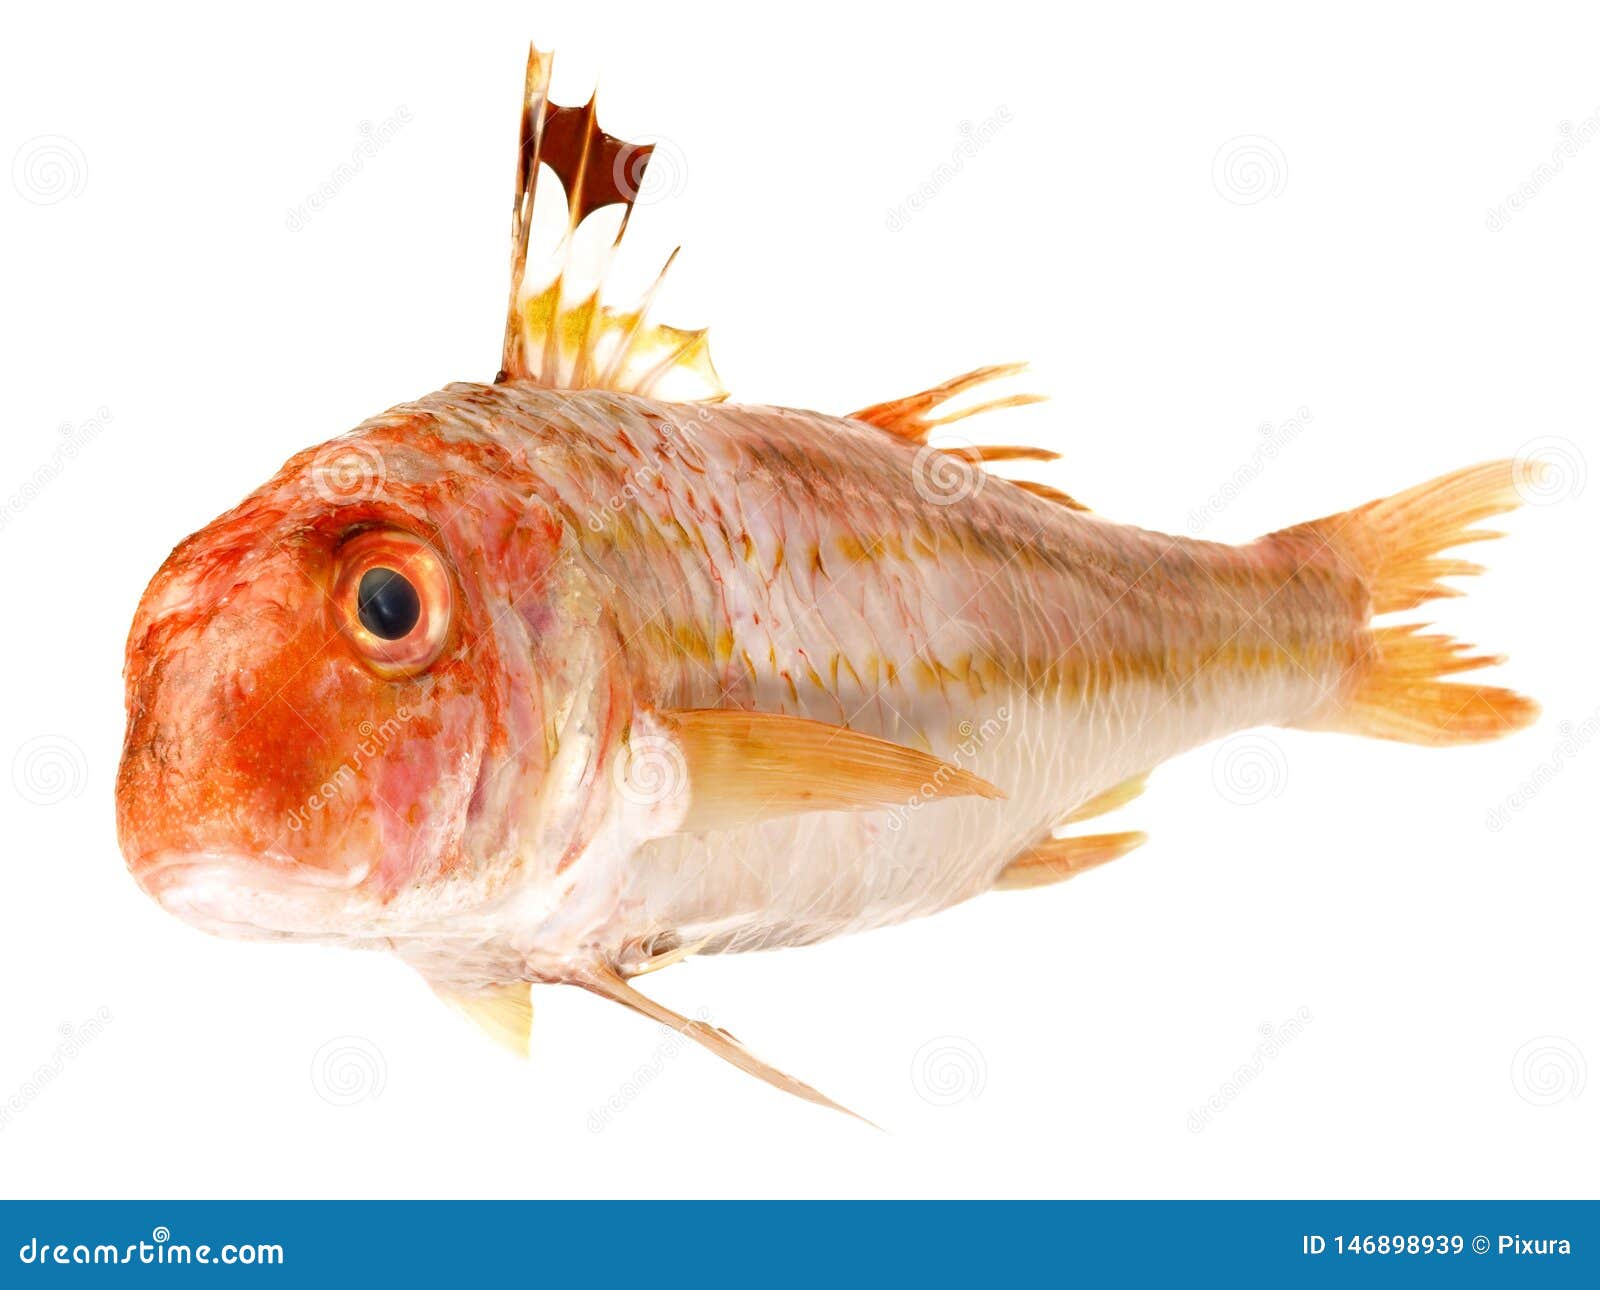 Fish Red Mullet stock image. Image of gourmet, farm